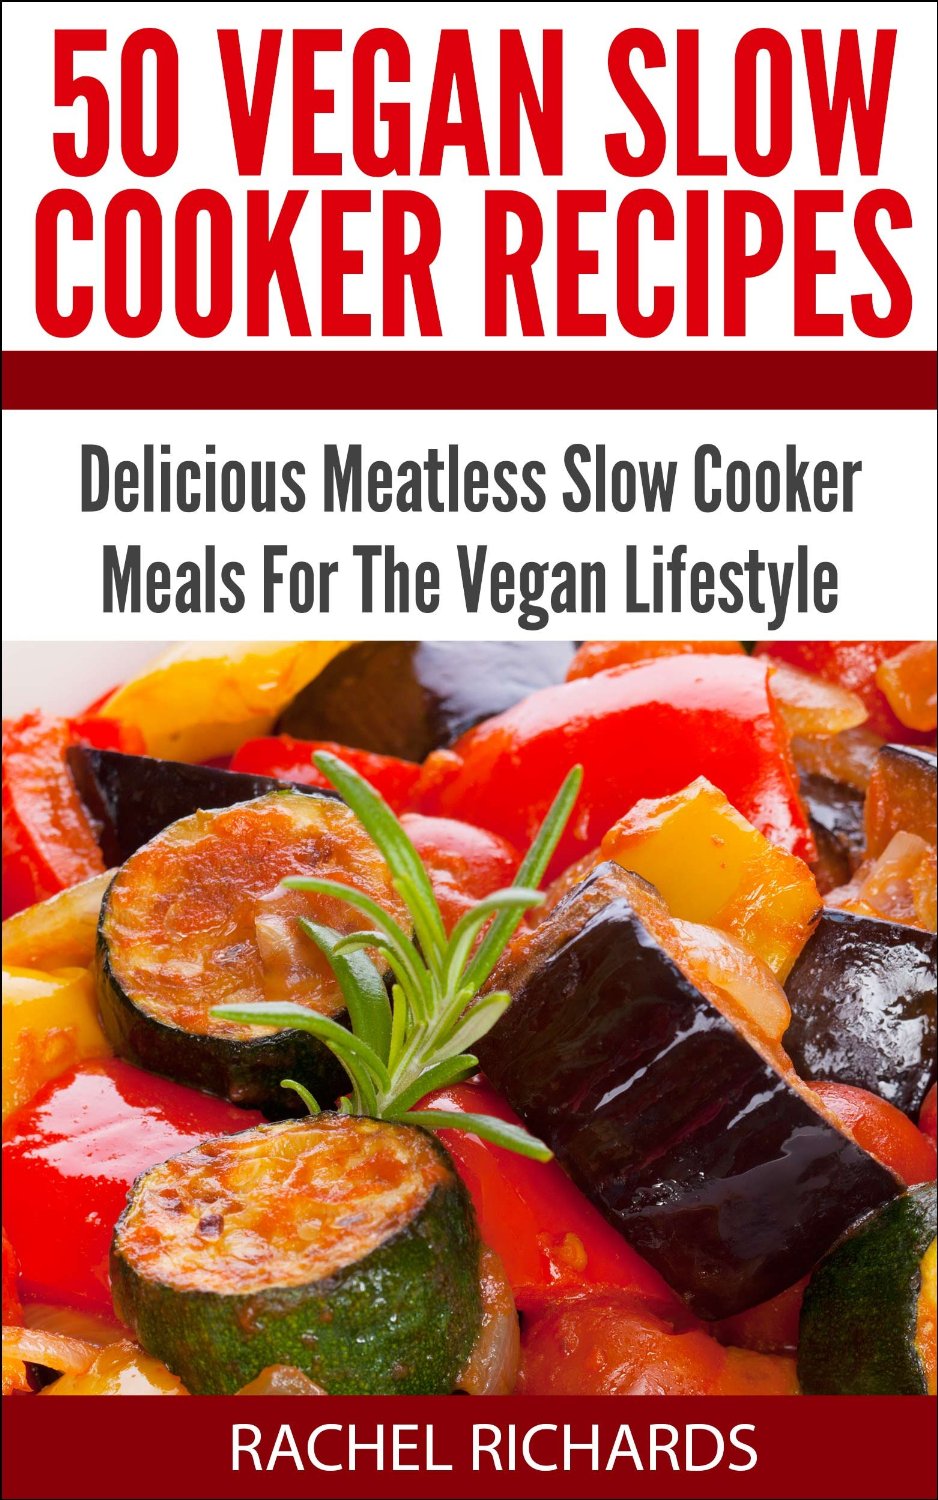 50 Vegan Slow Cooker Recipes: Delicious Meatless Slow Cooker Meals For The Vegan Lifestyle by Frank Yim